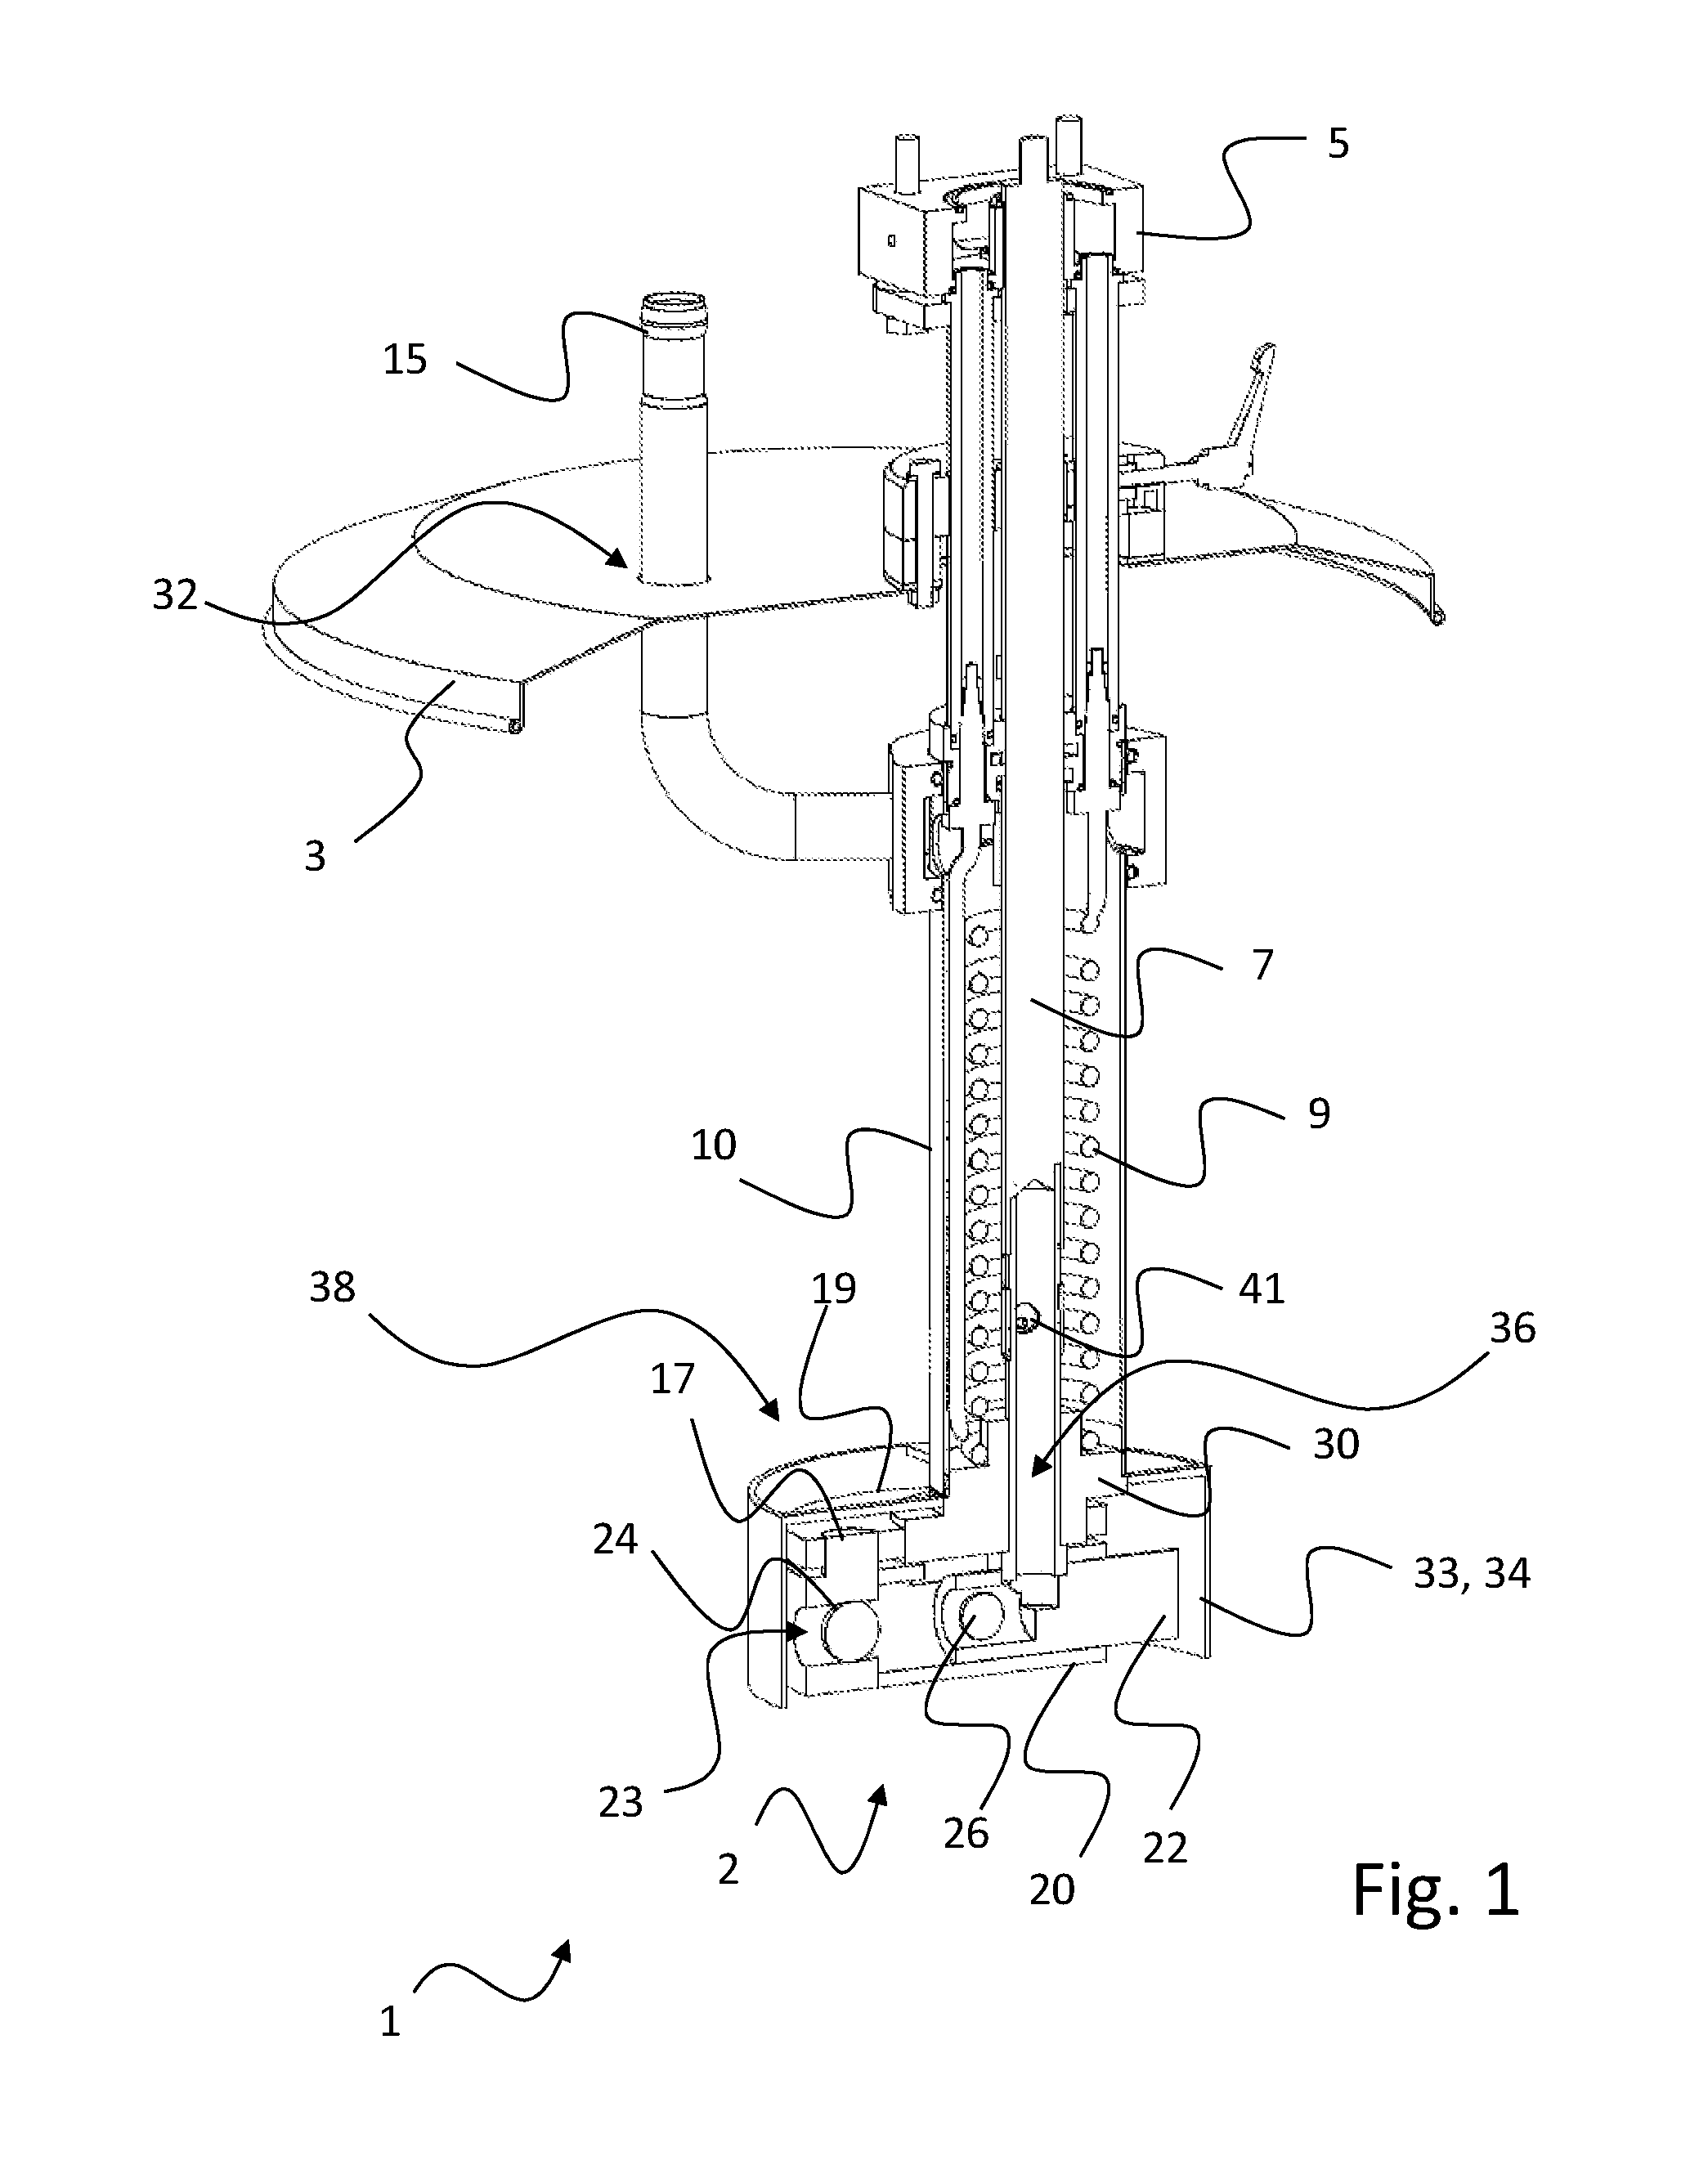 Pumping device and method for conveying viscous media, in particular adhesives